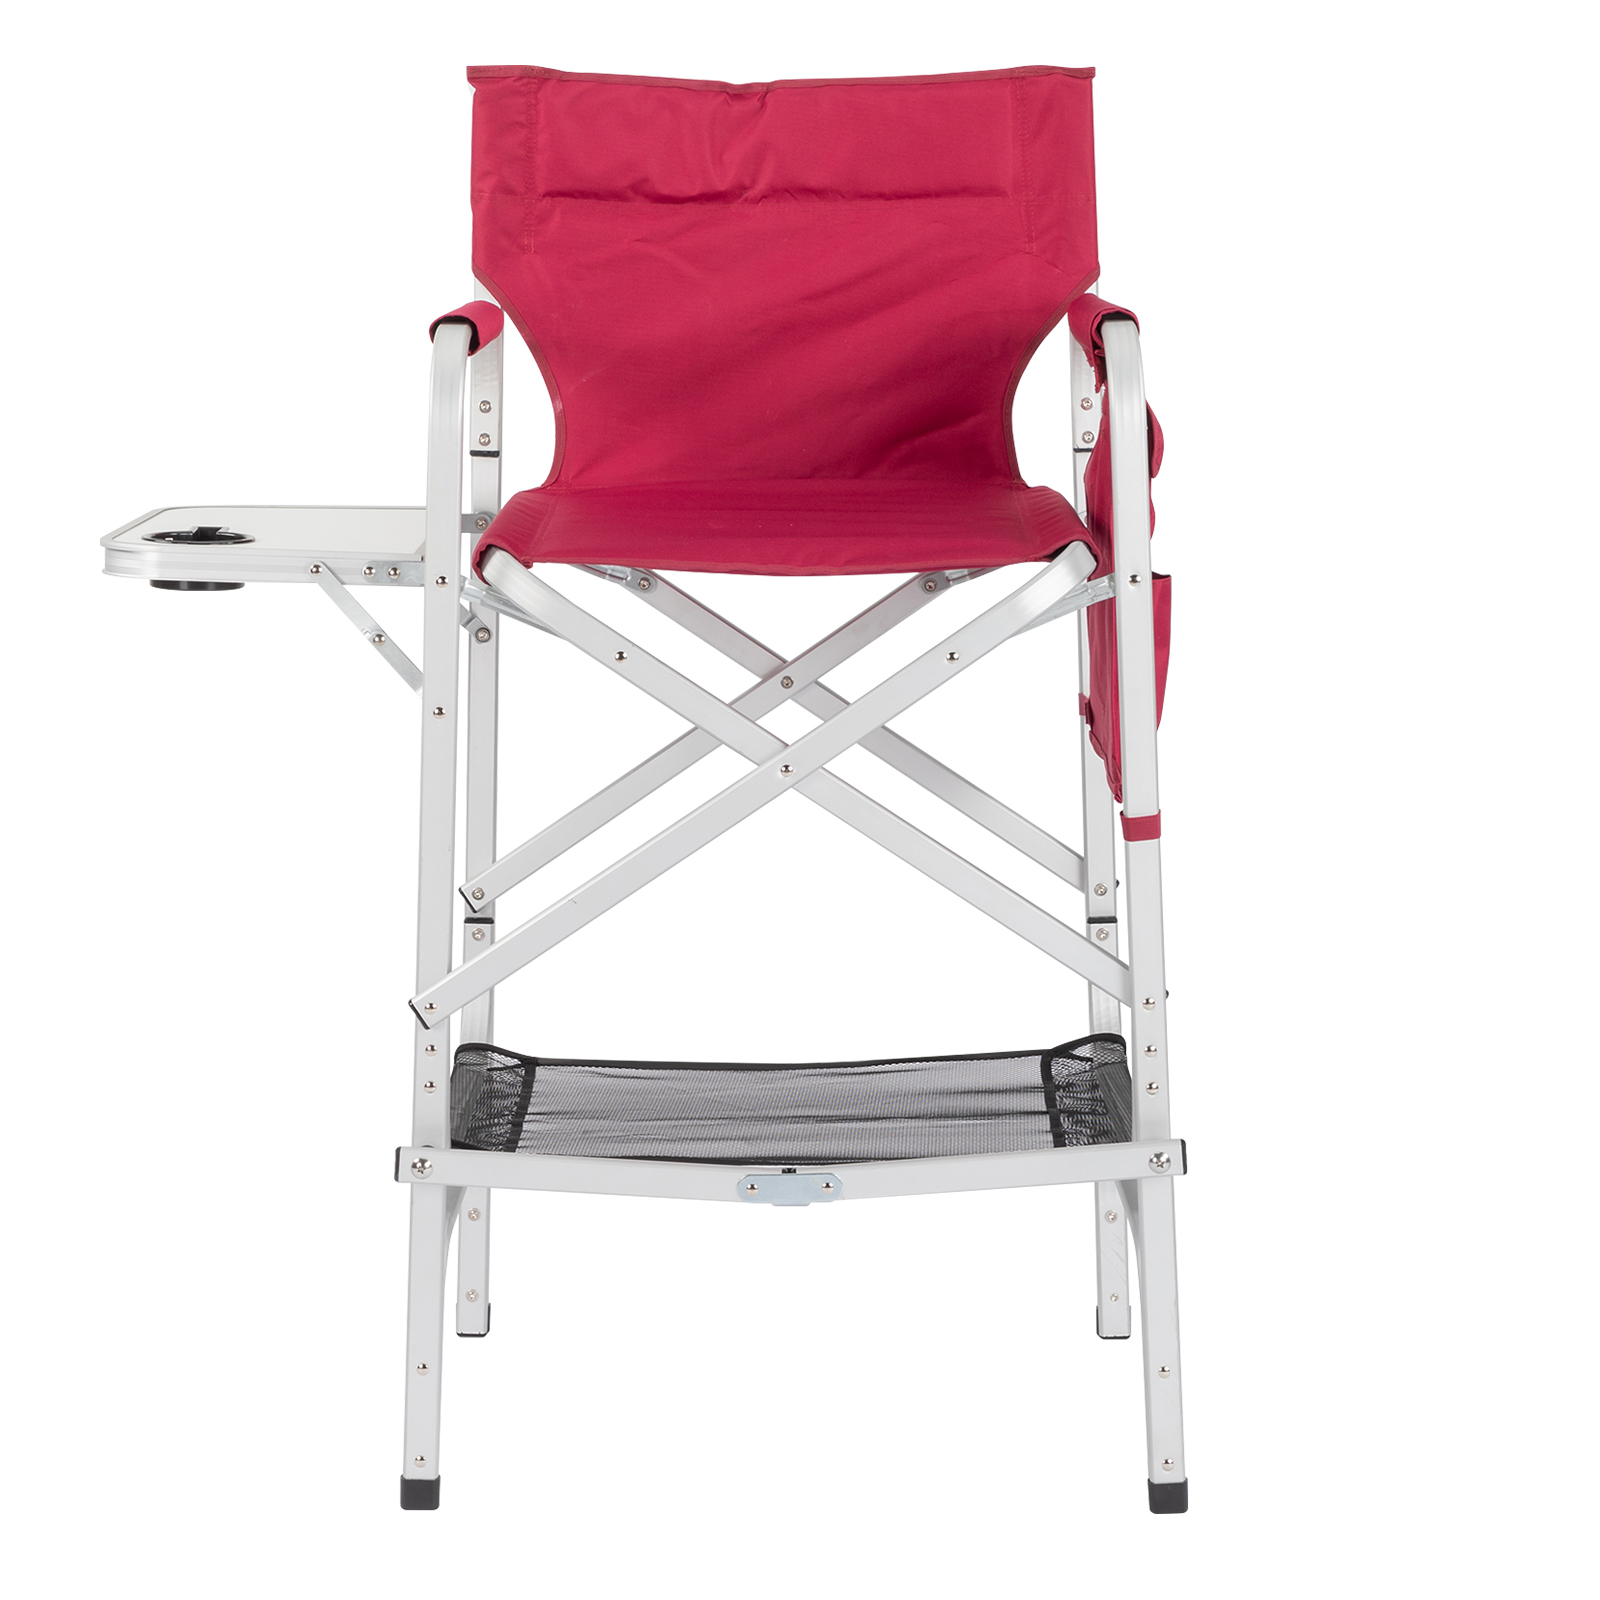 GoDecor Director Chair Oversize Padded Seat Camping Chair with Side Table Red - image 1 of 7